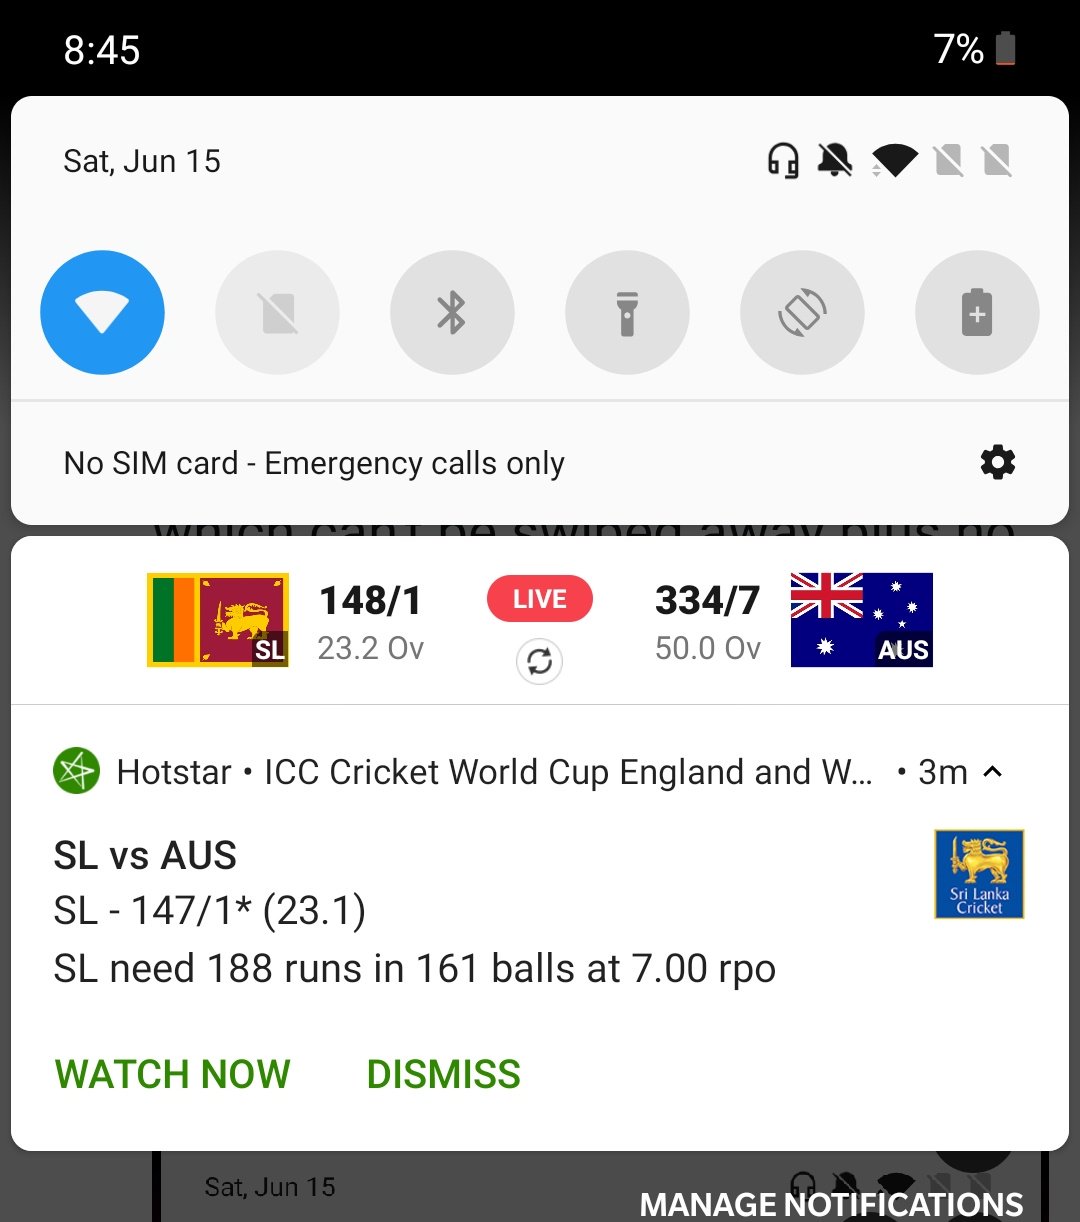 cricket channels